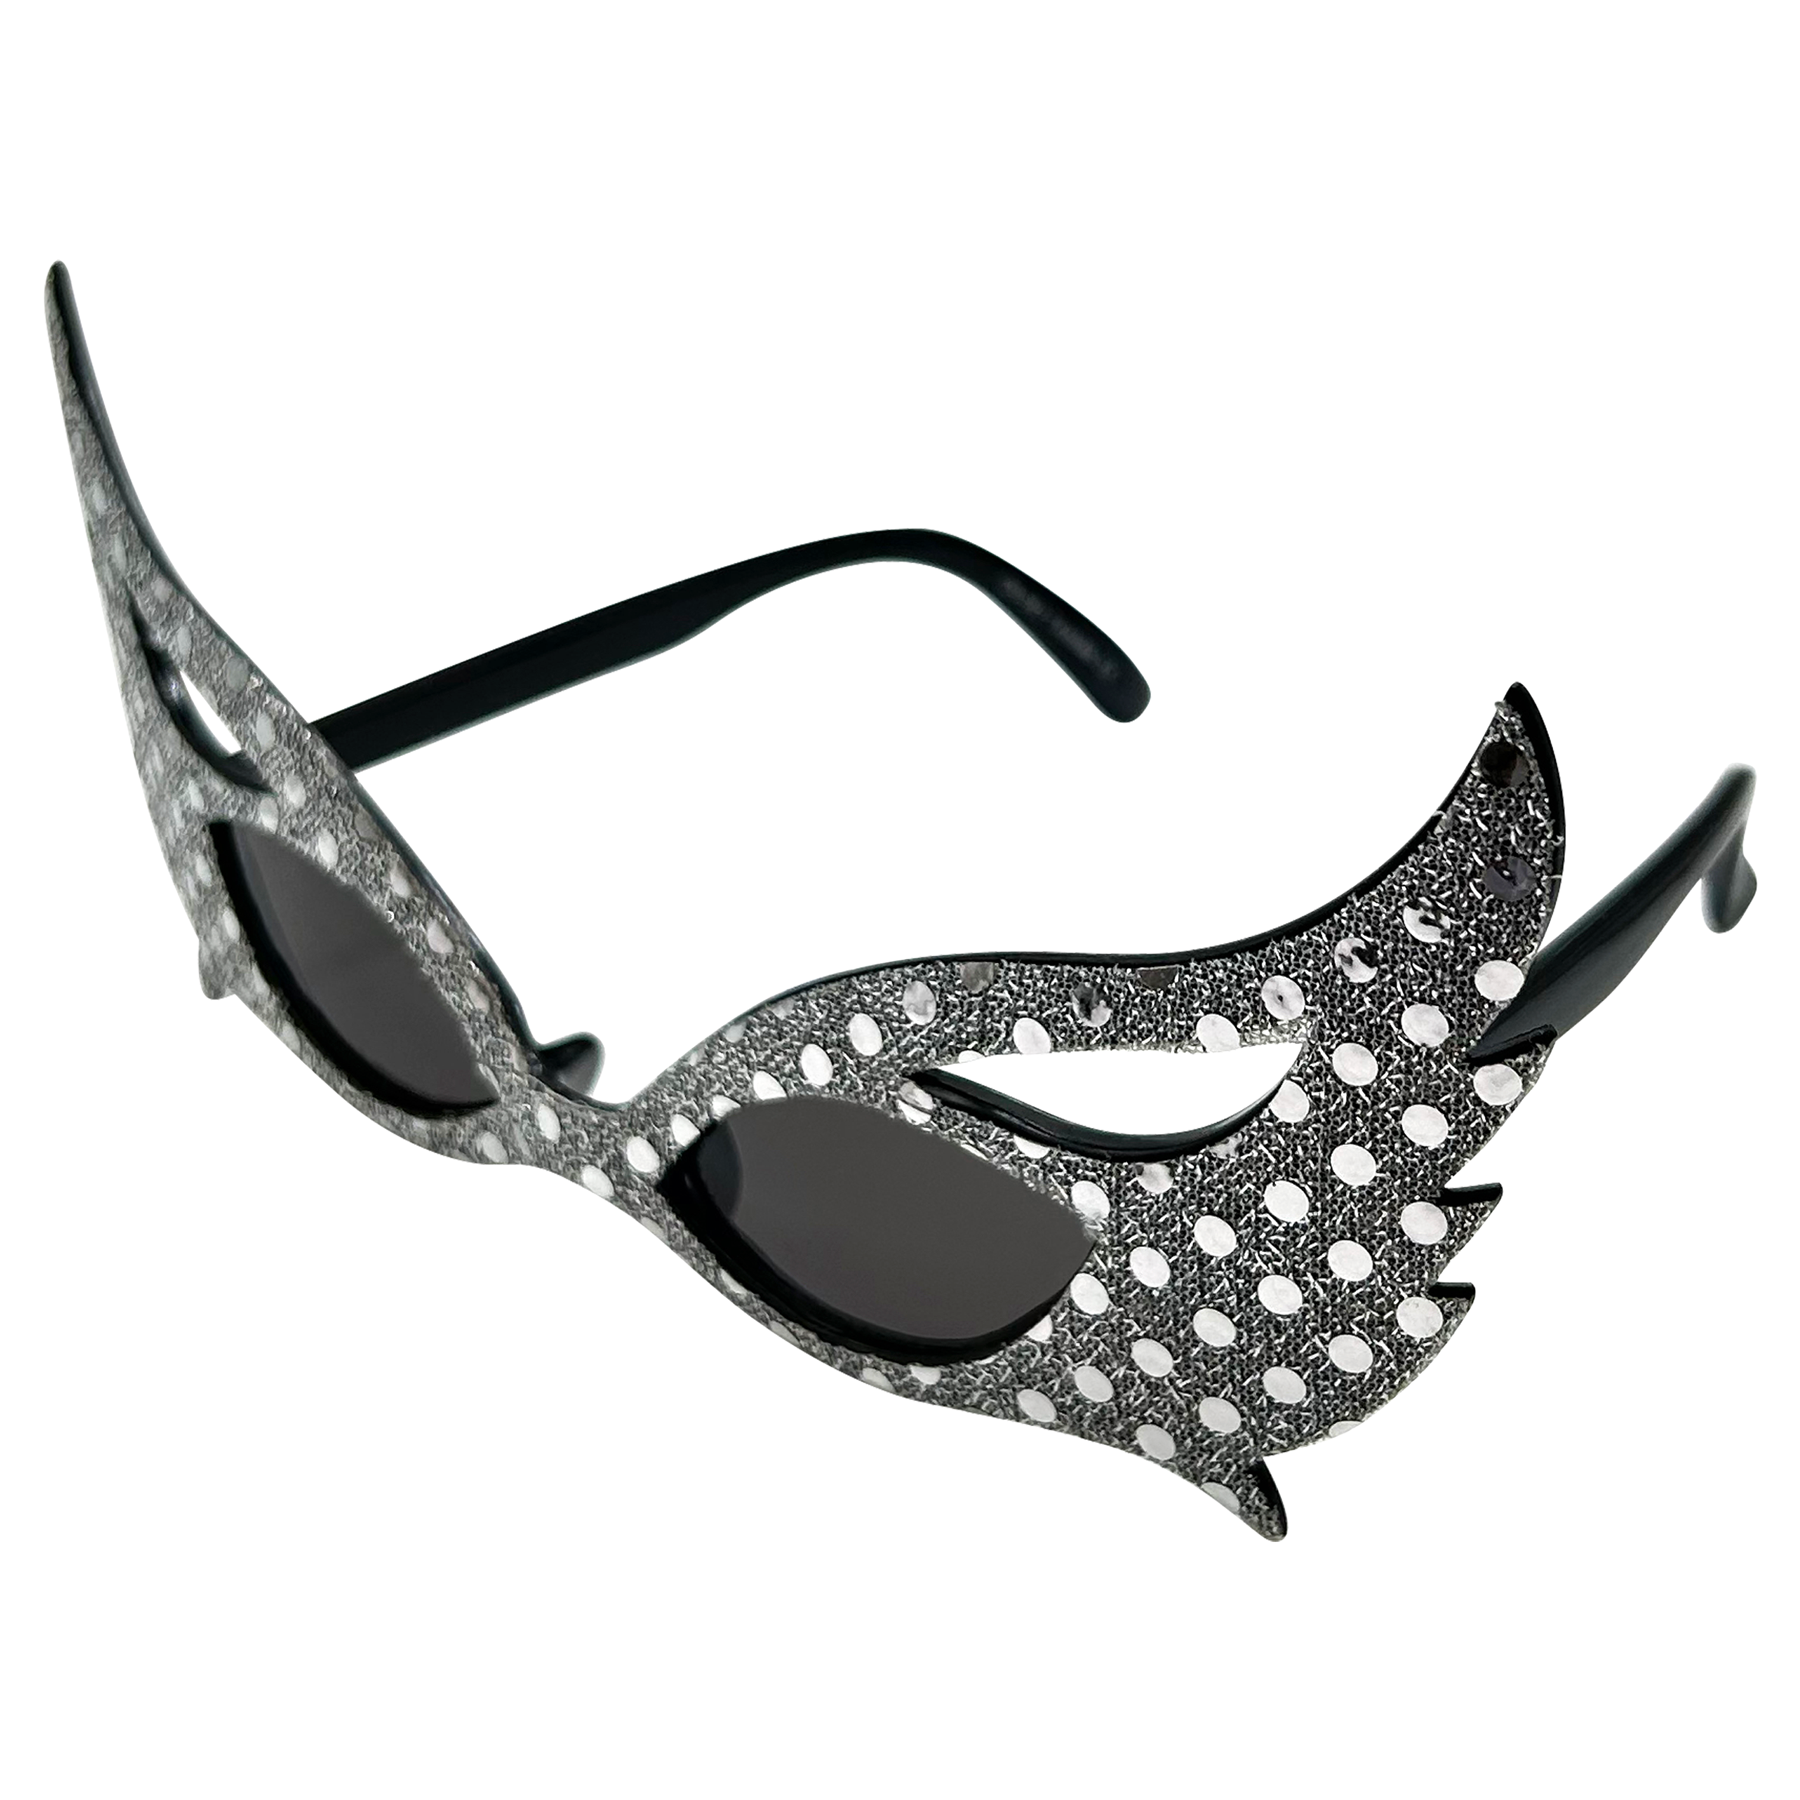 WHISKERS Sparkly Cat-Eye Party Sunglasses